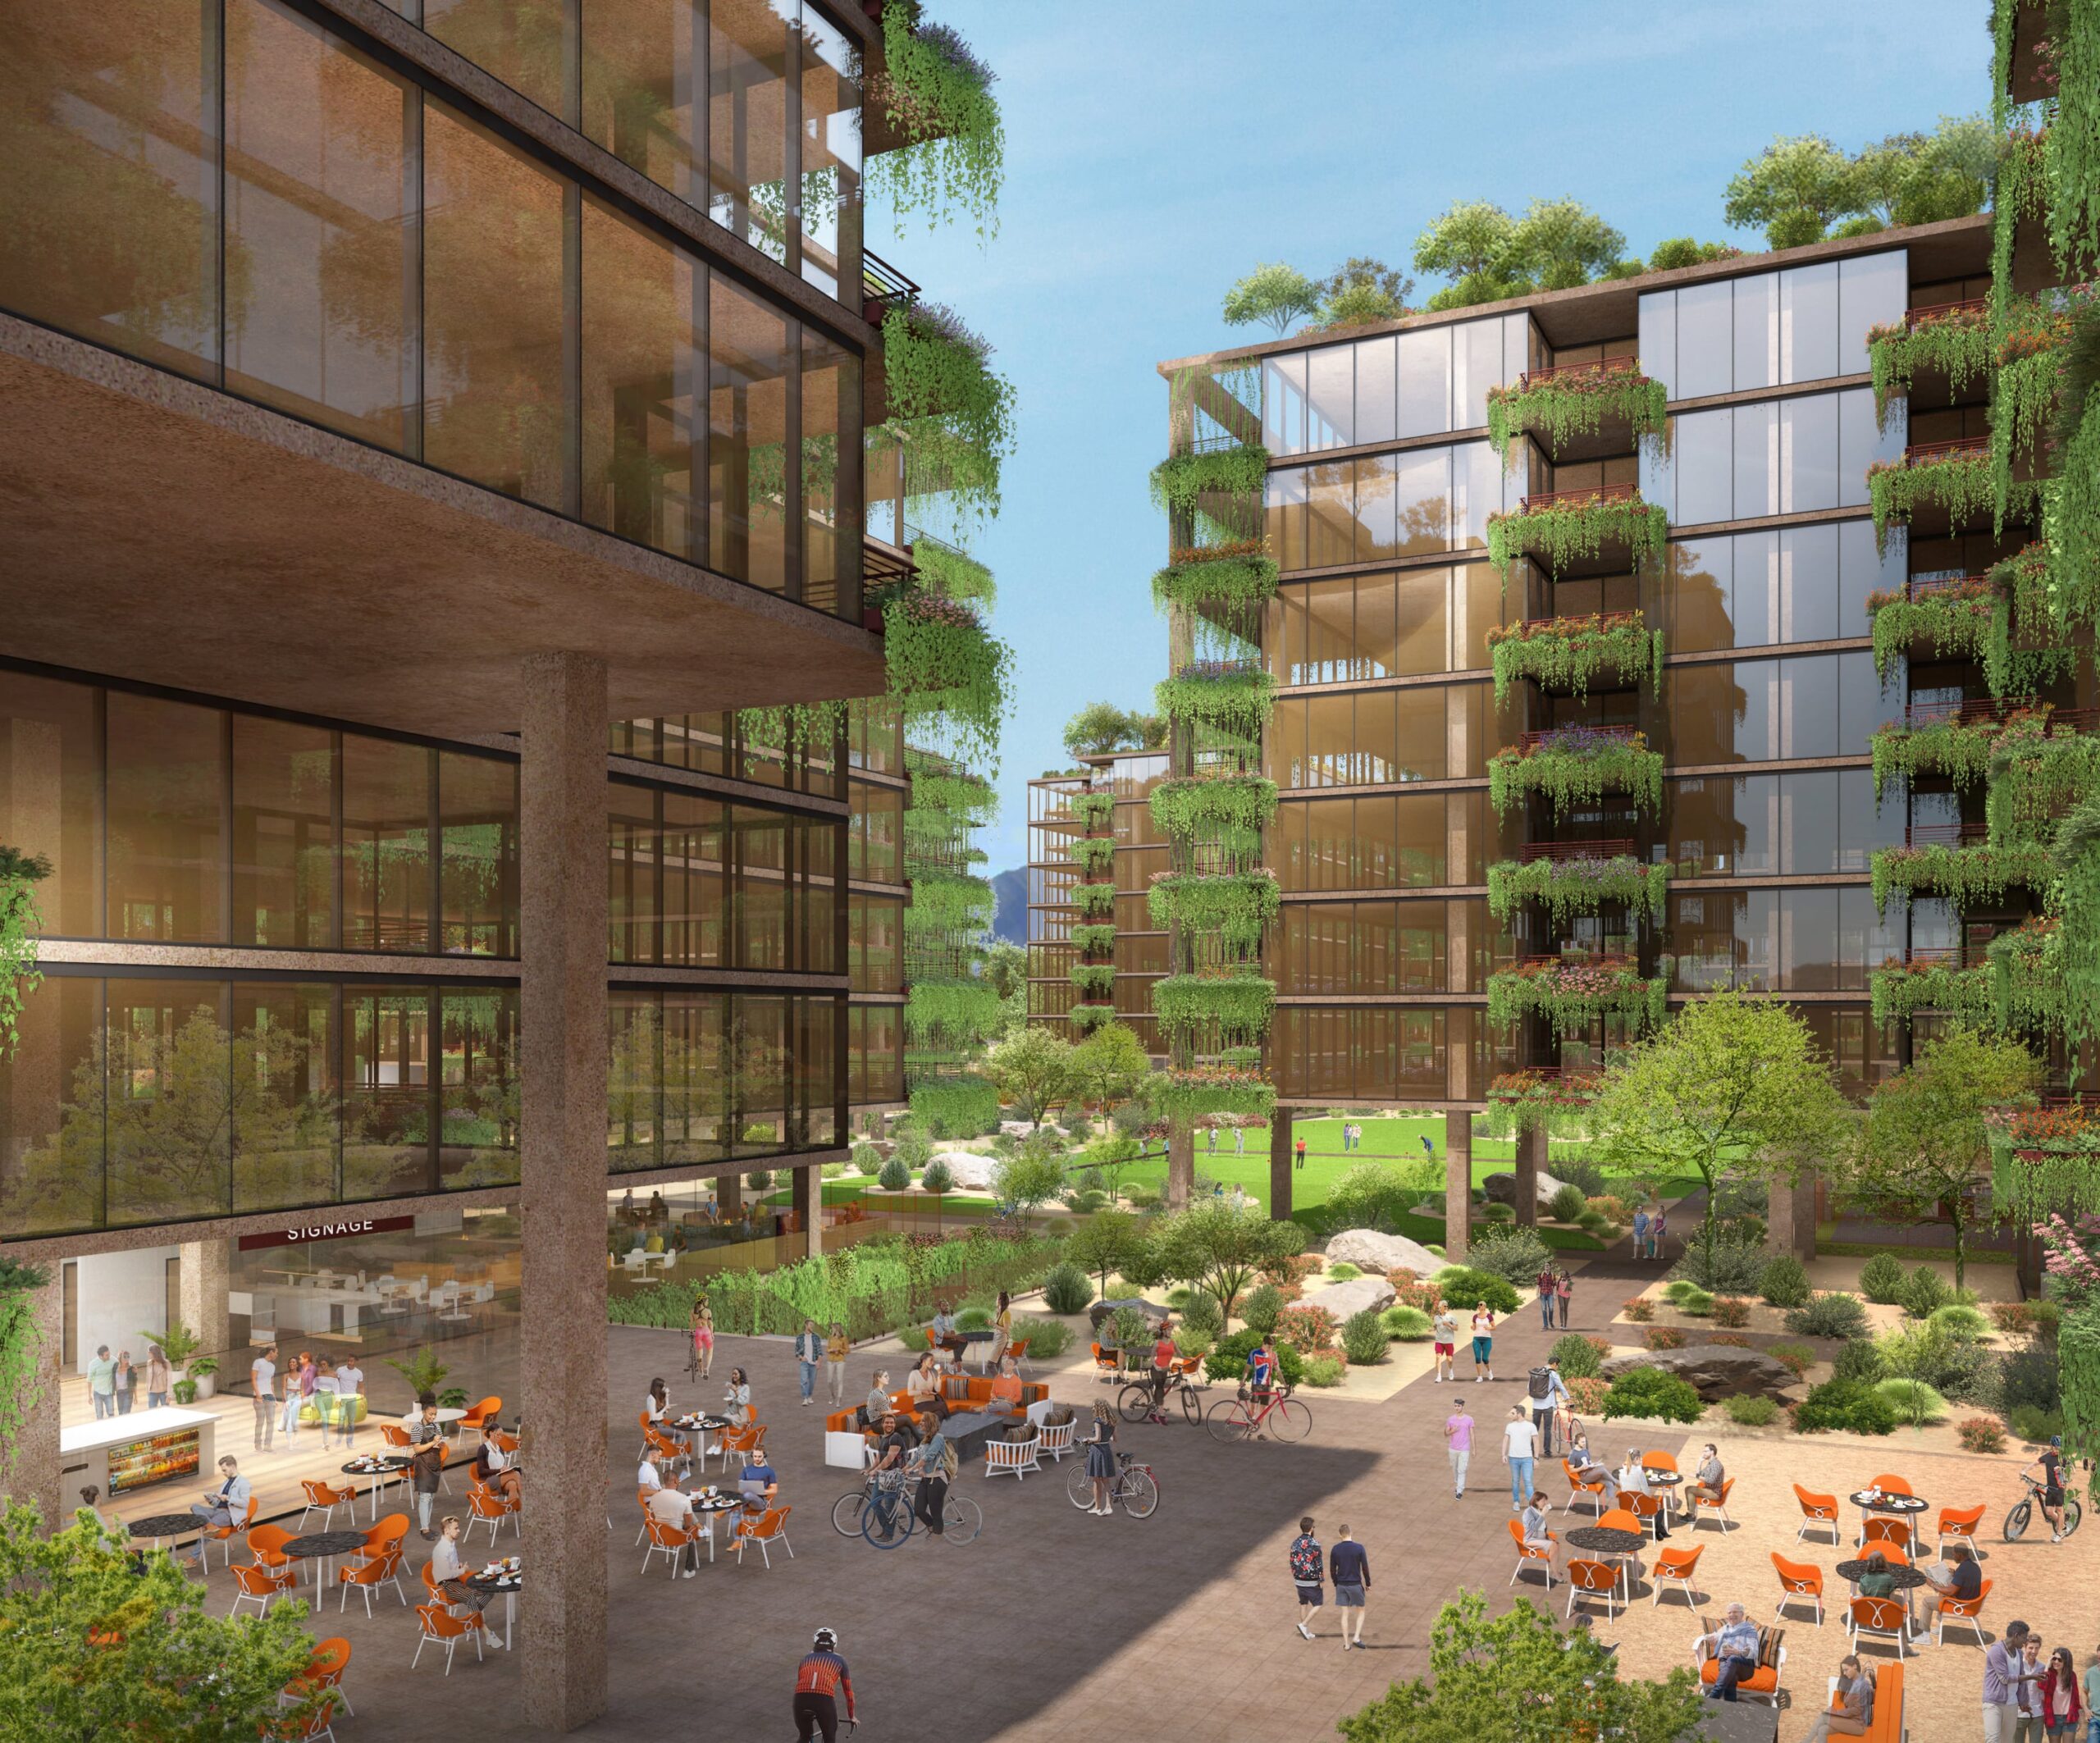 New Optima N. Scottsdale Will be a $1 Billion Sustainable Mixed-Use Development